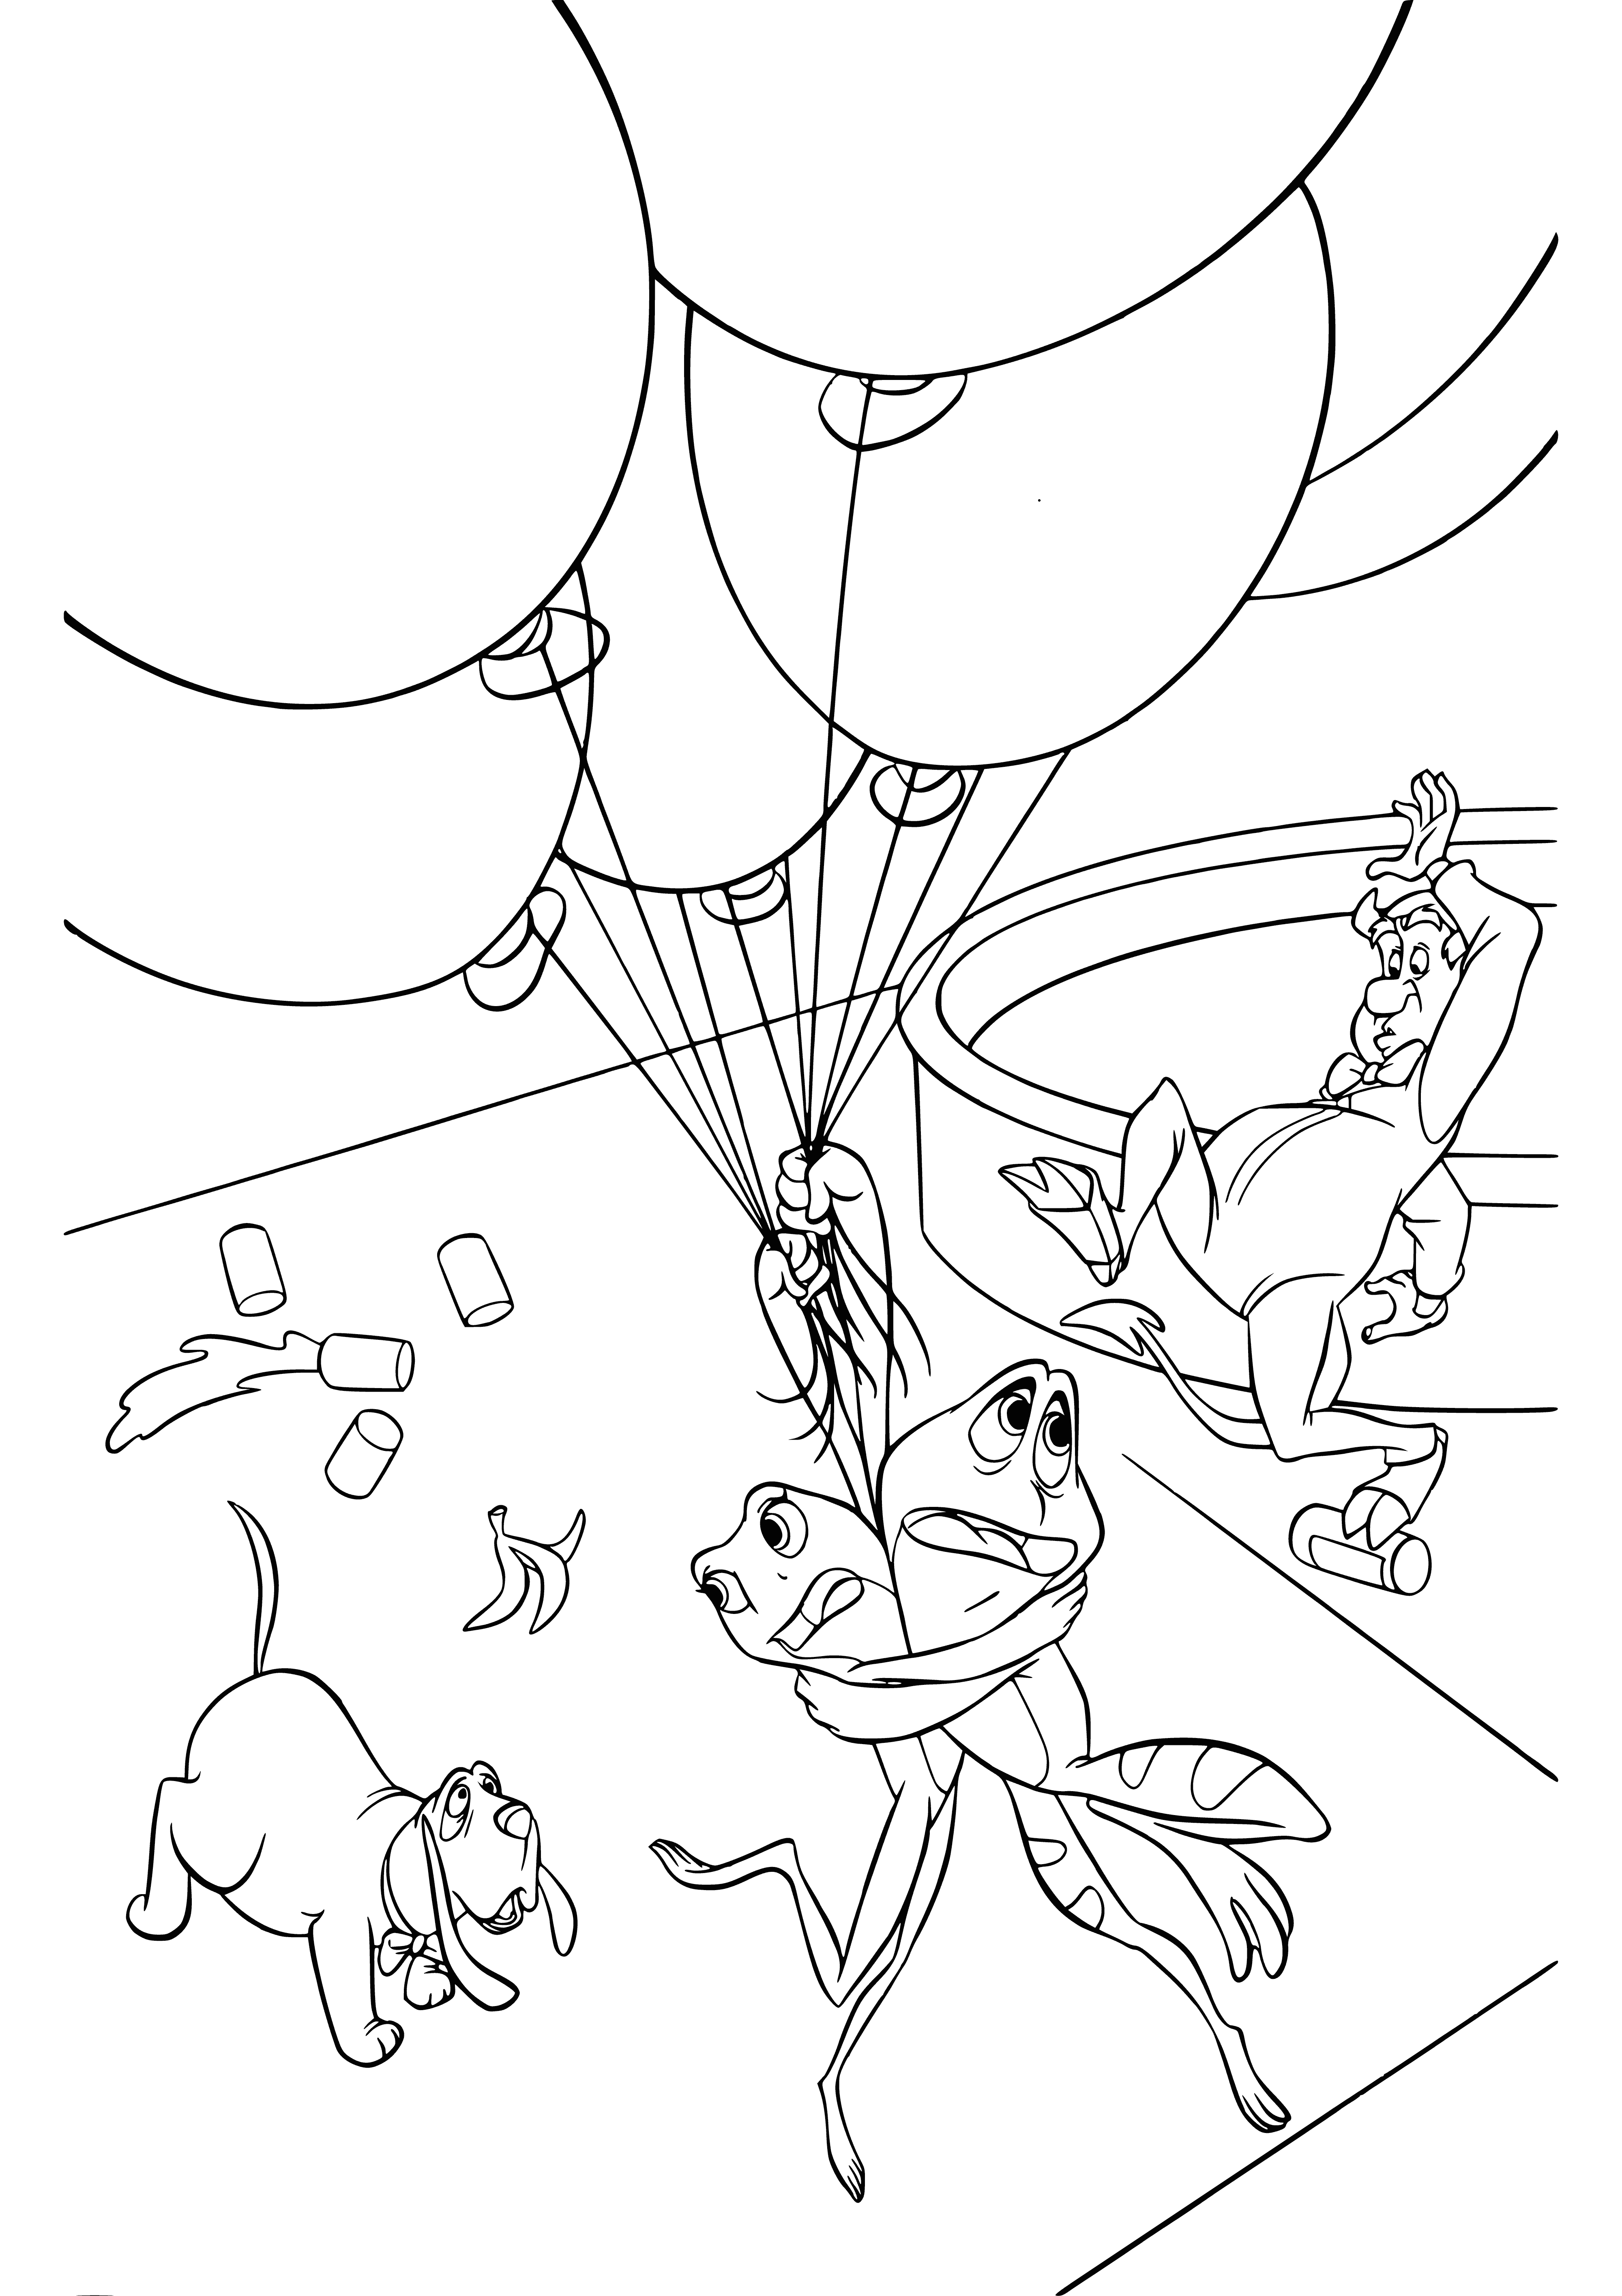 coloring page: Disney Princess Tiana & her frog prince wave goodbye from a colourful hot air balloon, soaring into the sky with helium-filled vigour.